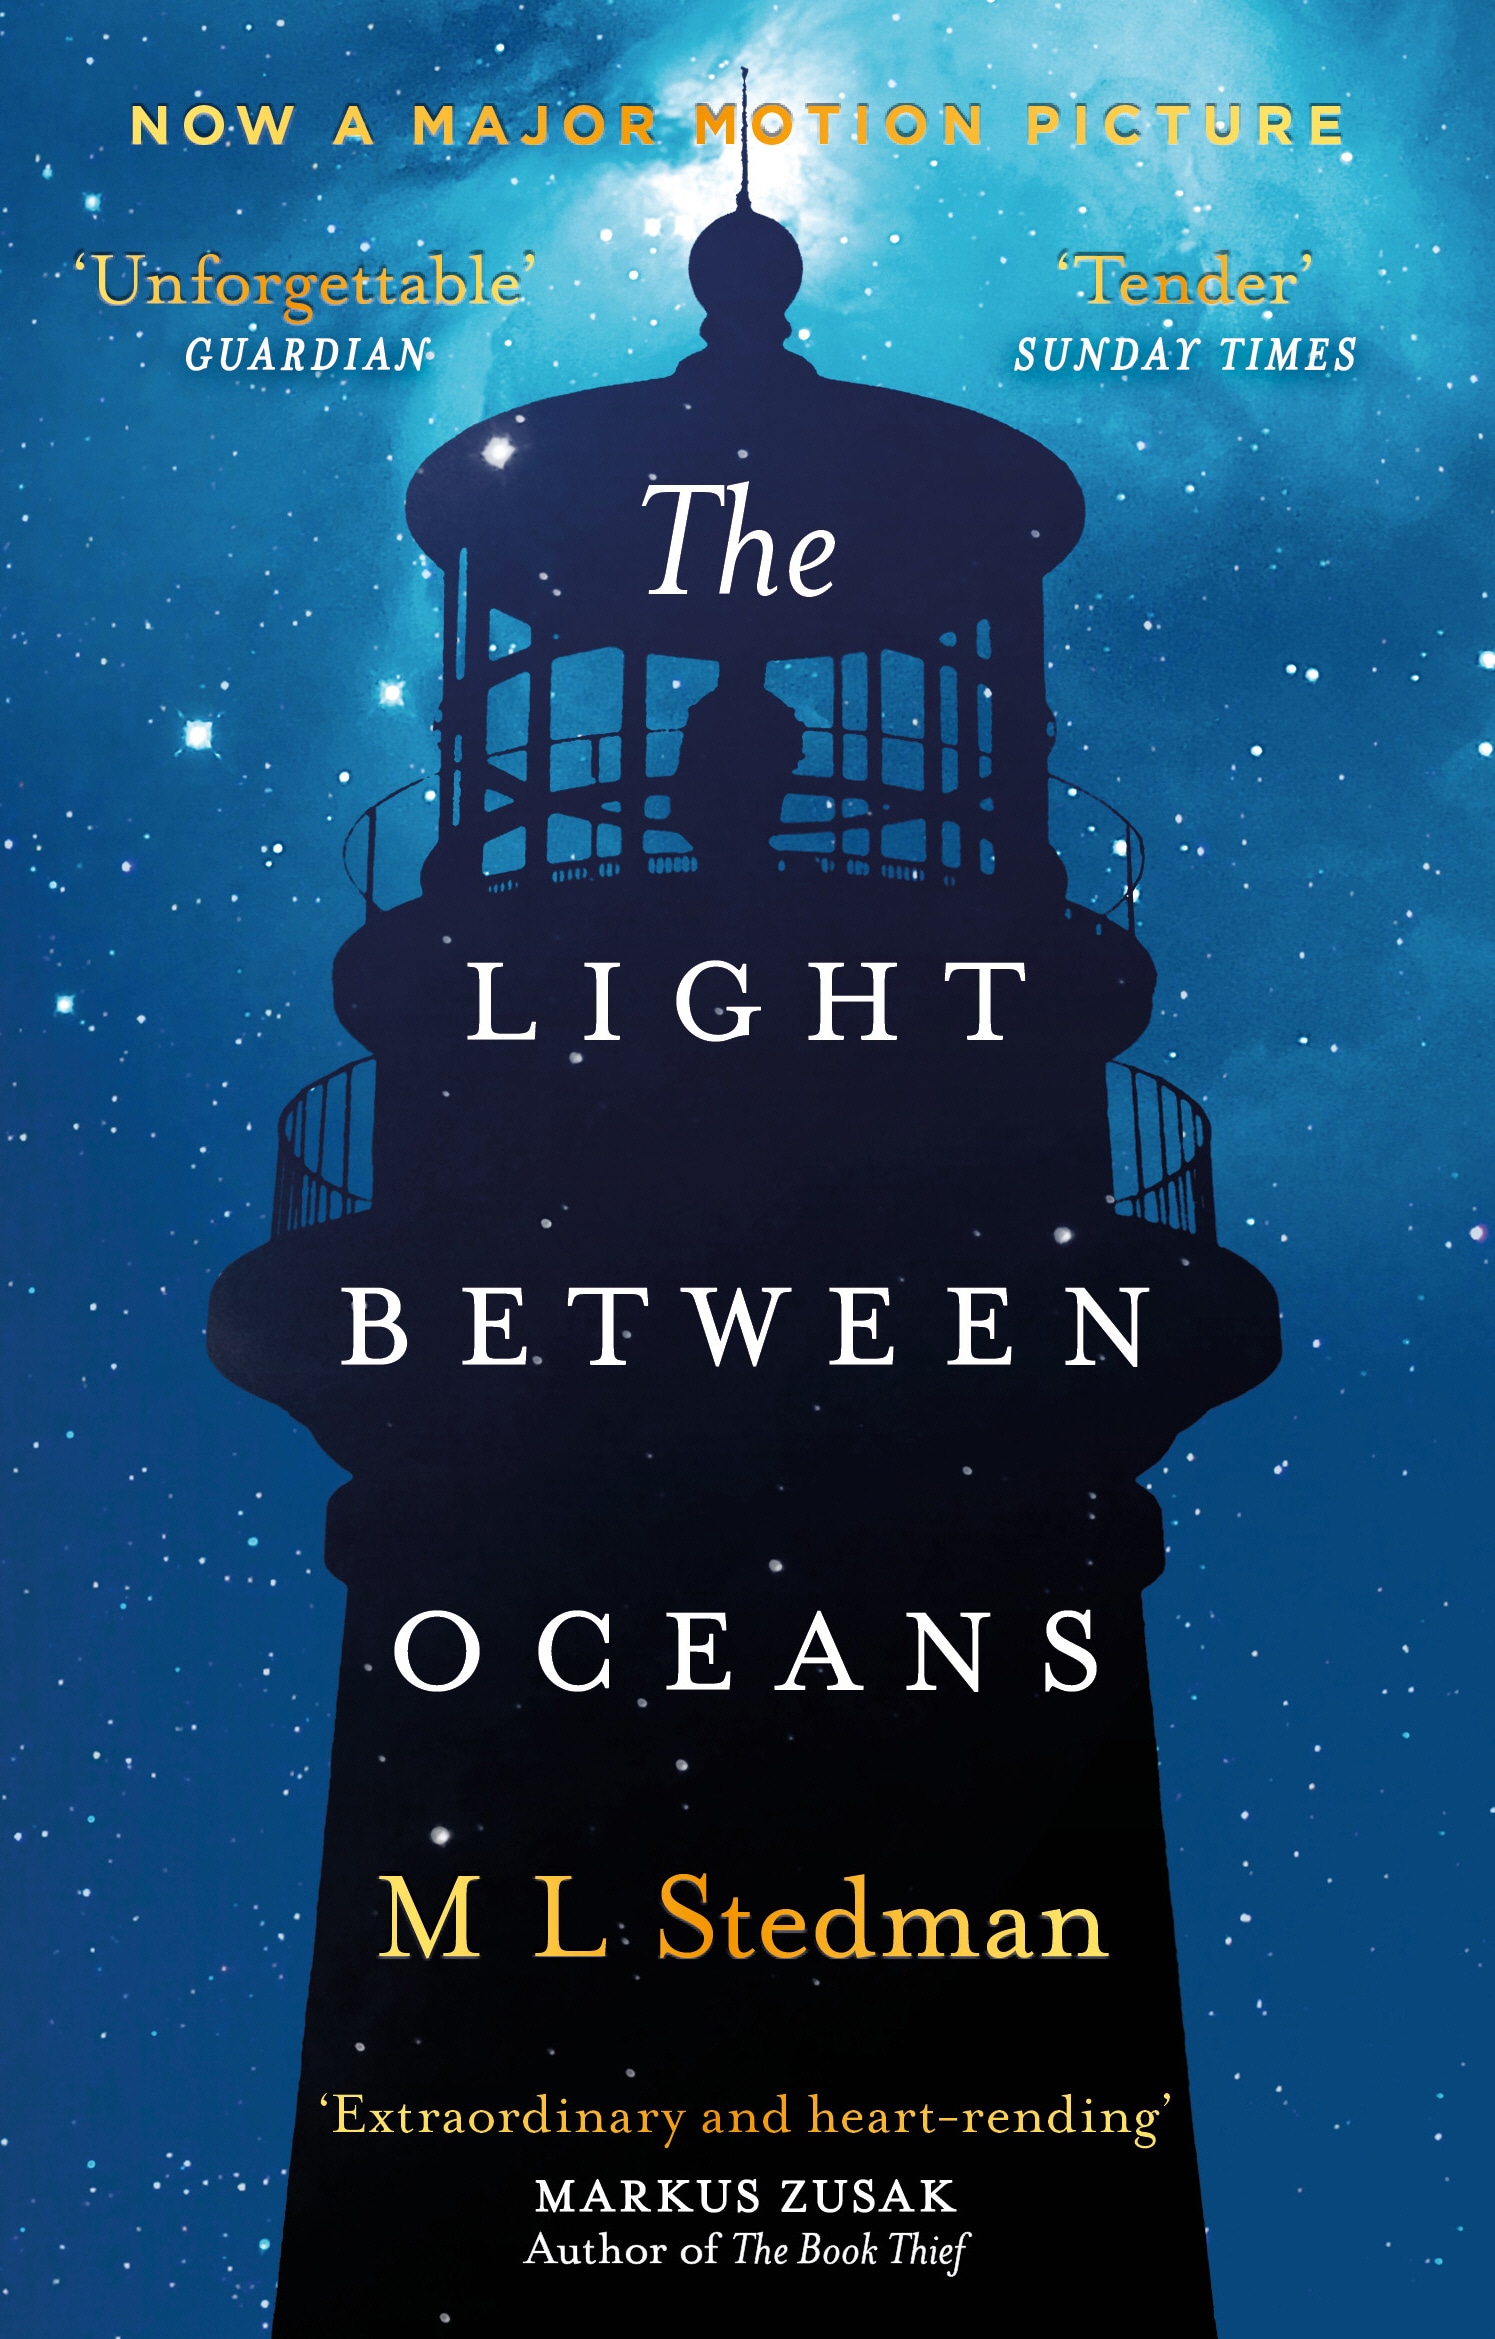 Book “The Light Between Oceans” by M L Stedman — May 9, 2013